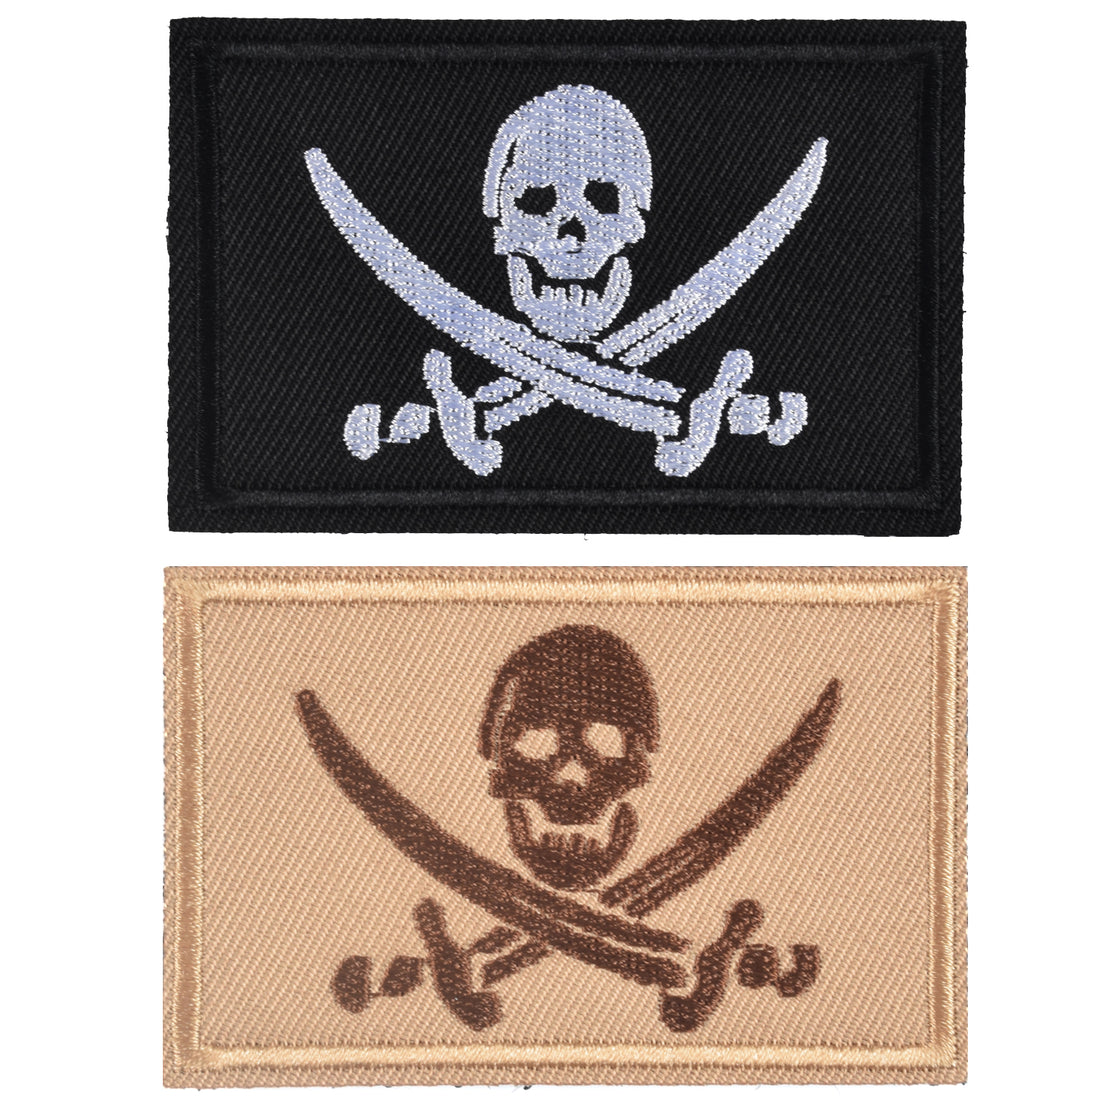 Tactical Black Beard Pirate Edward Skull Emblem Patch Ouch Pouch Bad  Decisions Make Good Stories Morale Applique Fastener Badge - AliExpress